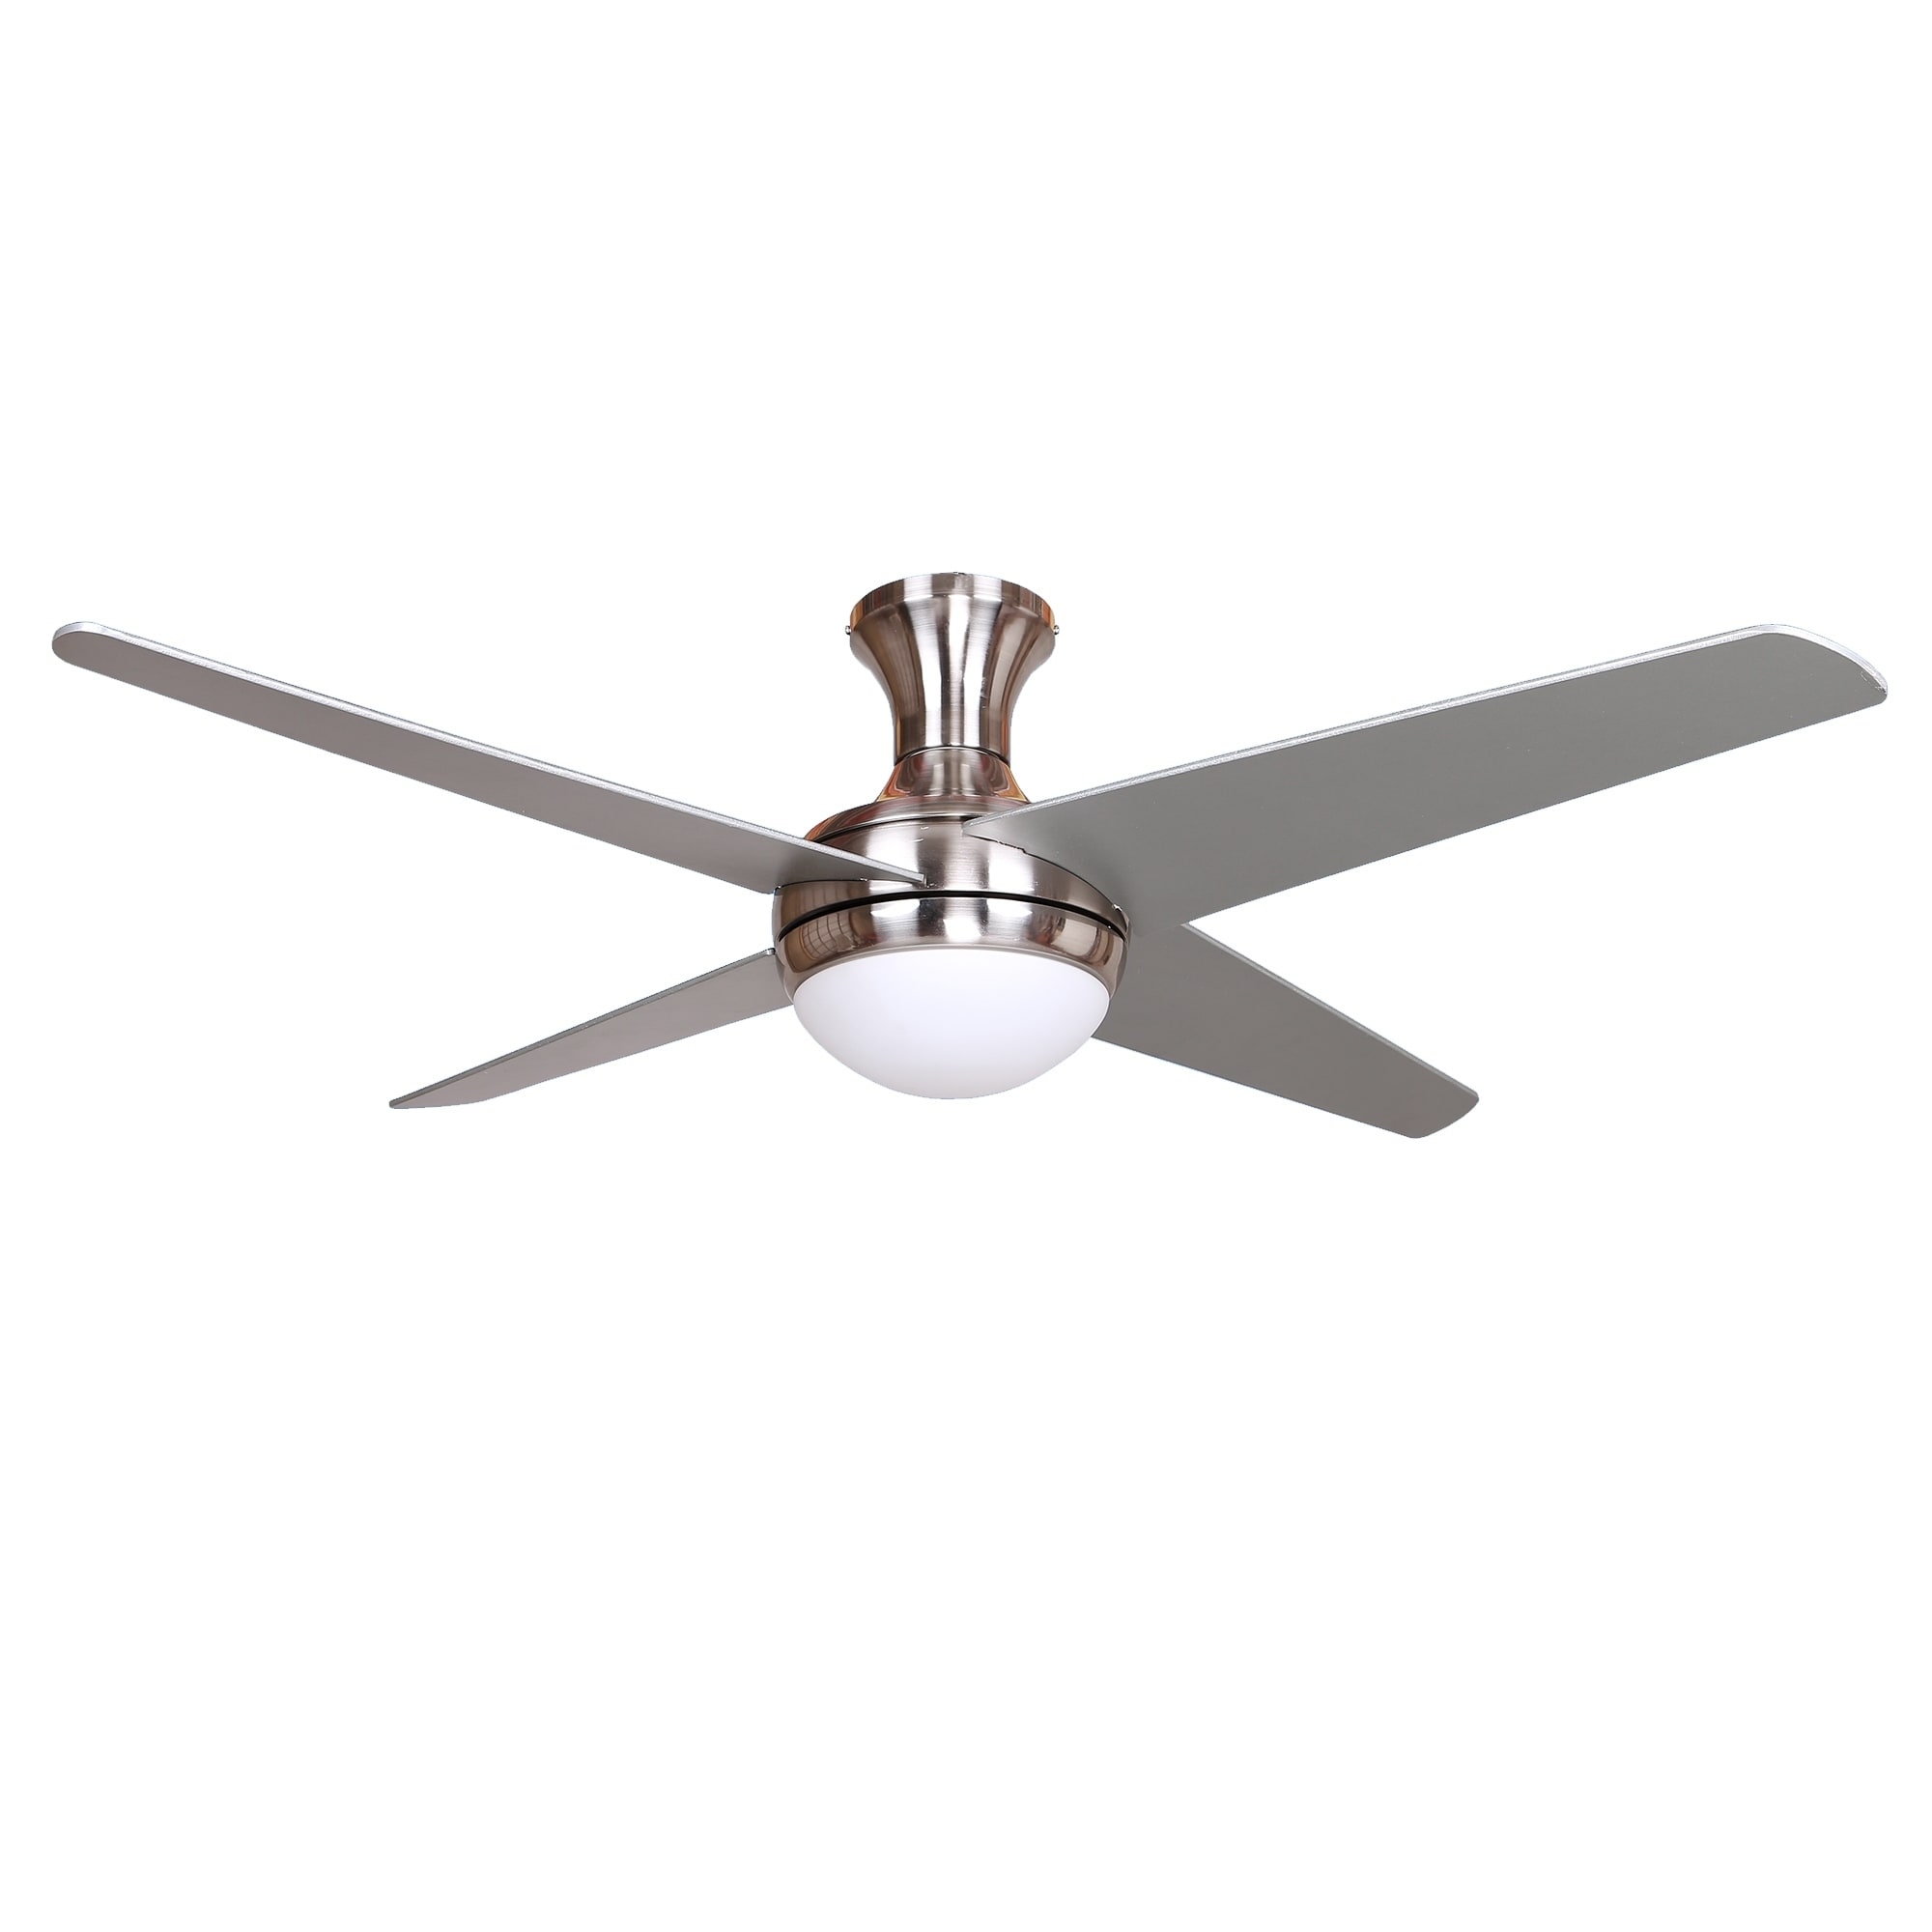 Shop Ascent 4 Blade Ceiling Fan In Silver And Black Blades On